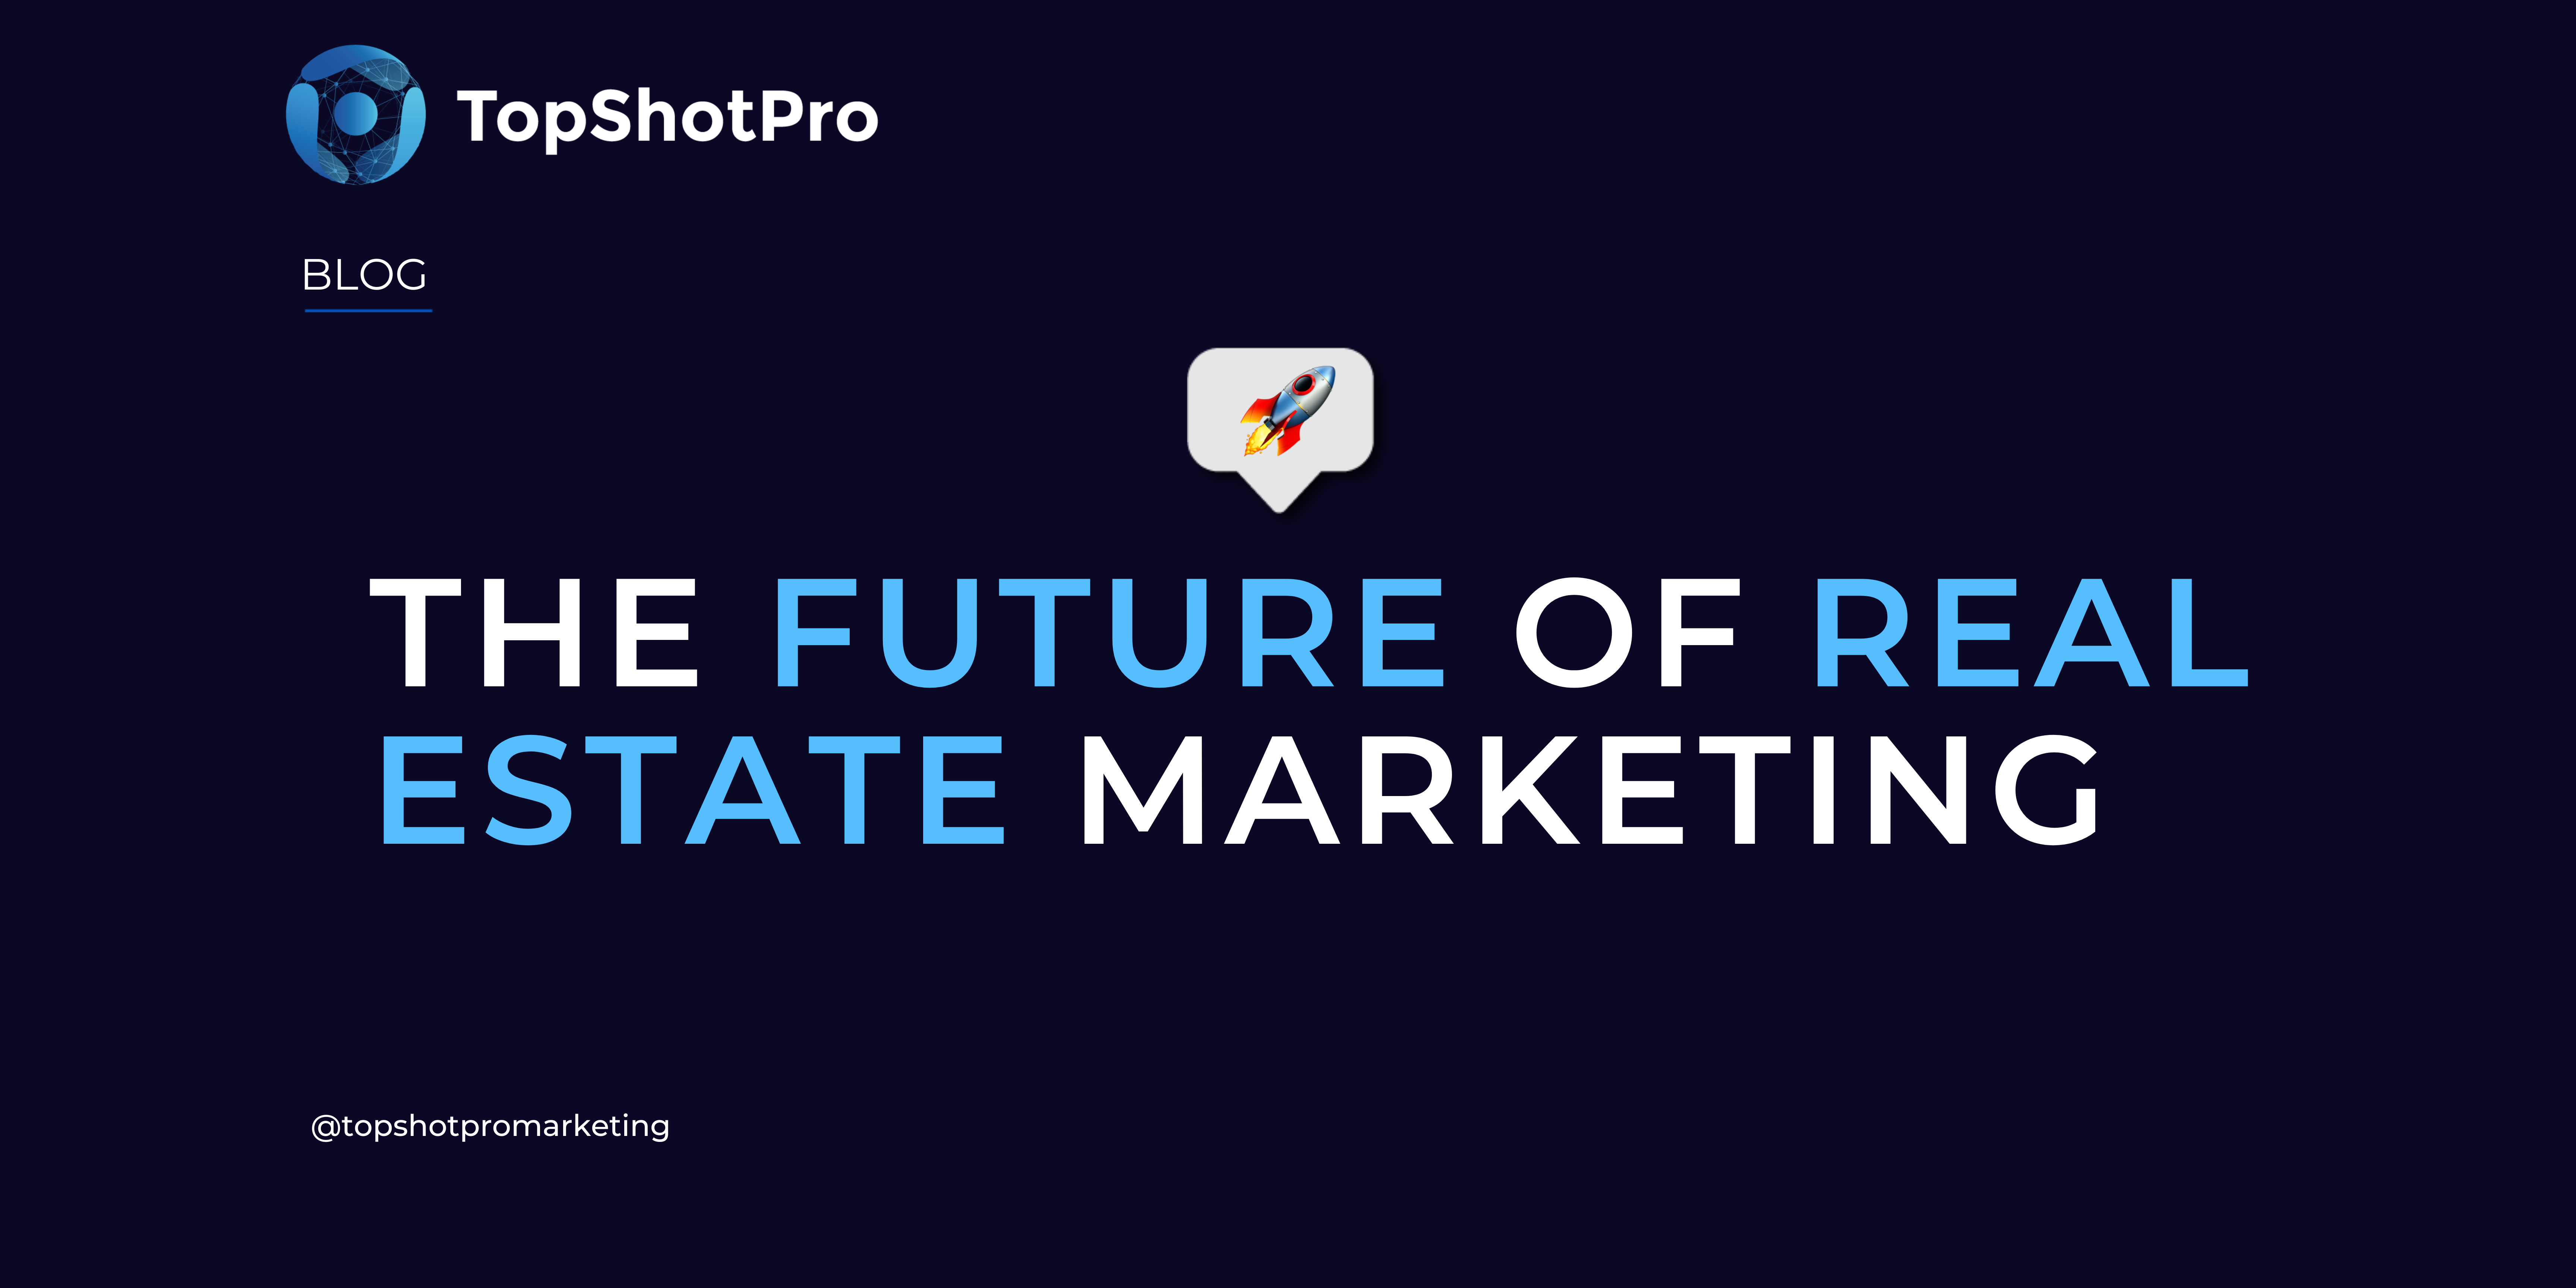 The Future of Real Estate Marketing & Technology: Tools for Building Your Digital Presence, Generating Qualified Leads & Elevating Your Brand